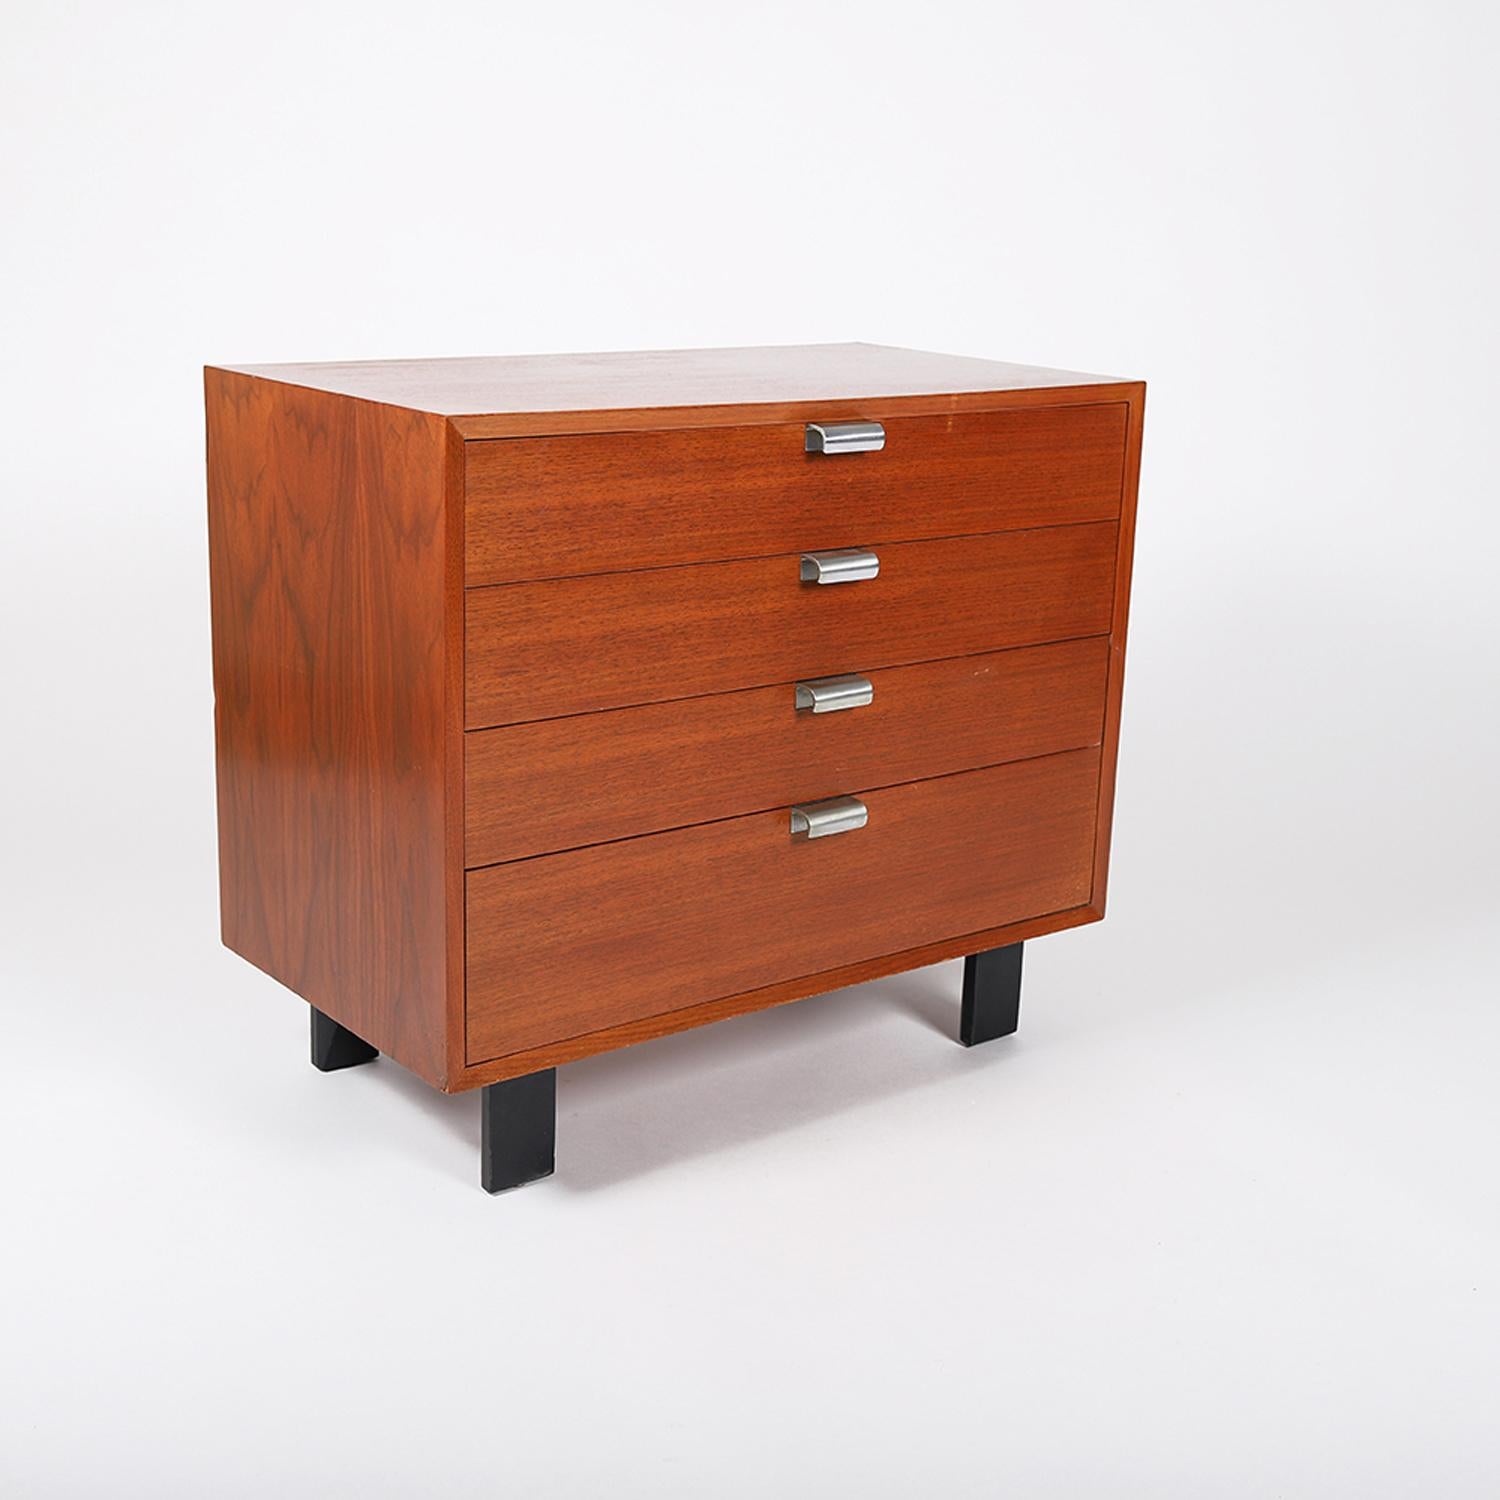 An American MCM 4 drawer chest designed by George Nelson for Herman Miller. A lacquered walnut case, black lacquered angular legs with cast aluminum drawer pulls. Top drawer has removable dividers. 

Professional, skilled furniture restoration is an